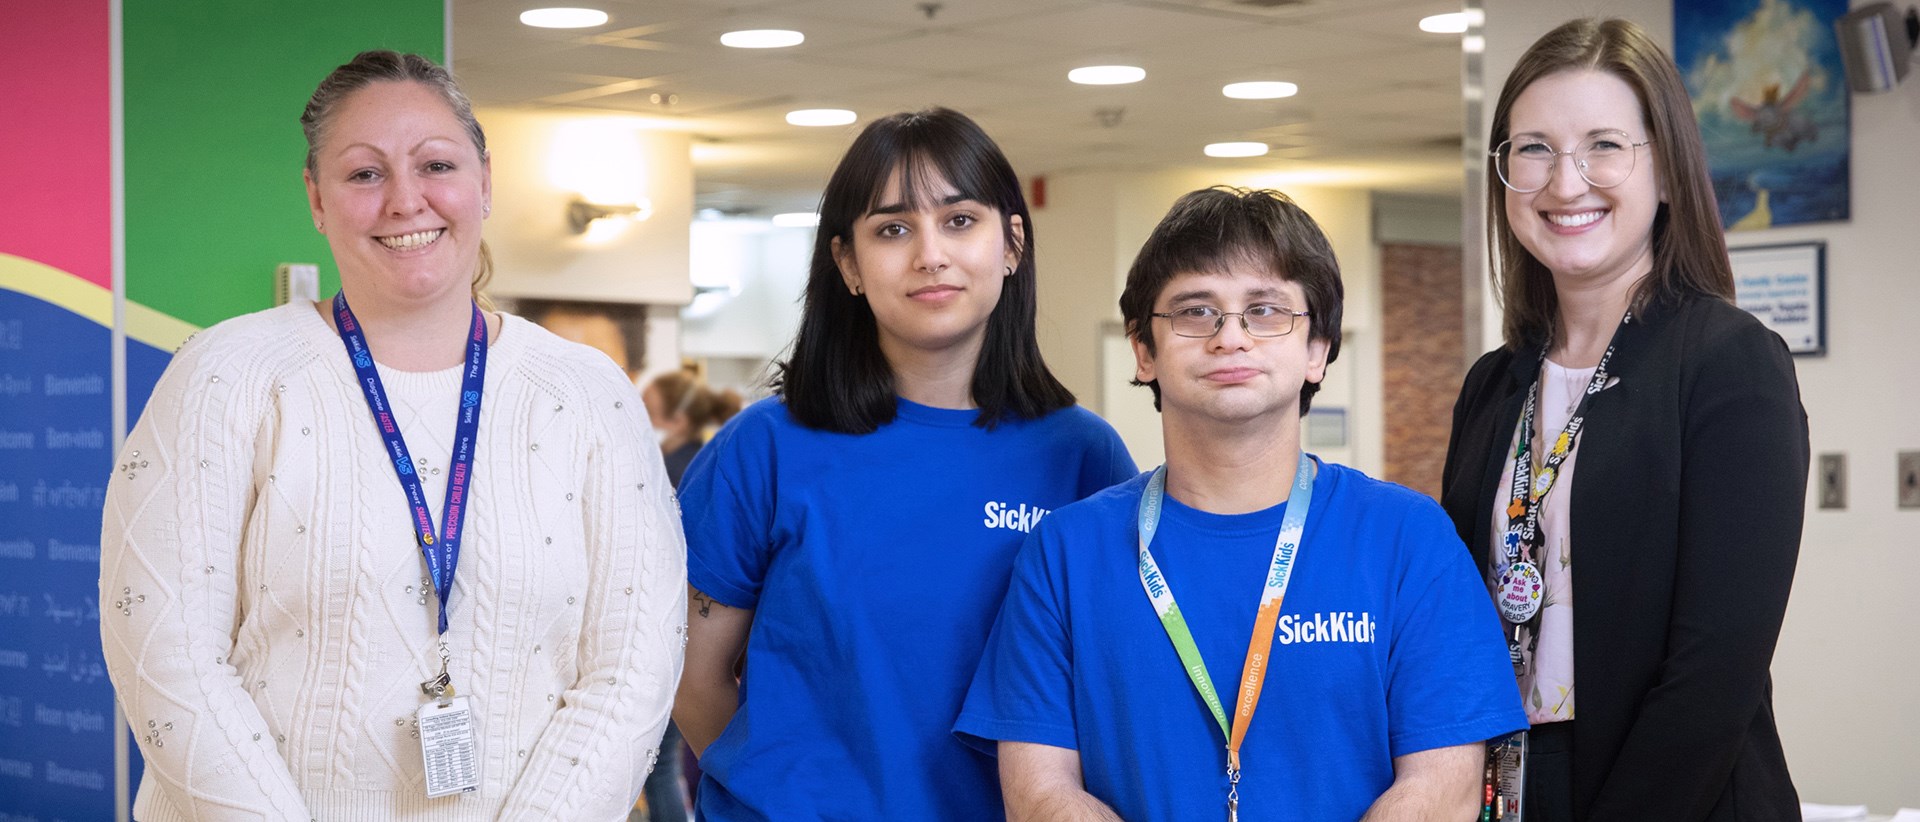 Four people standing together for a photo. Two individuals are wearing blue SickKids t-shirts.